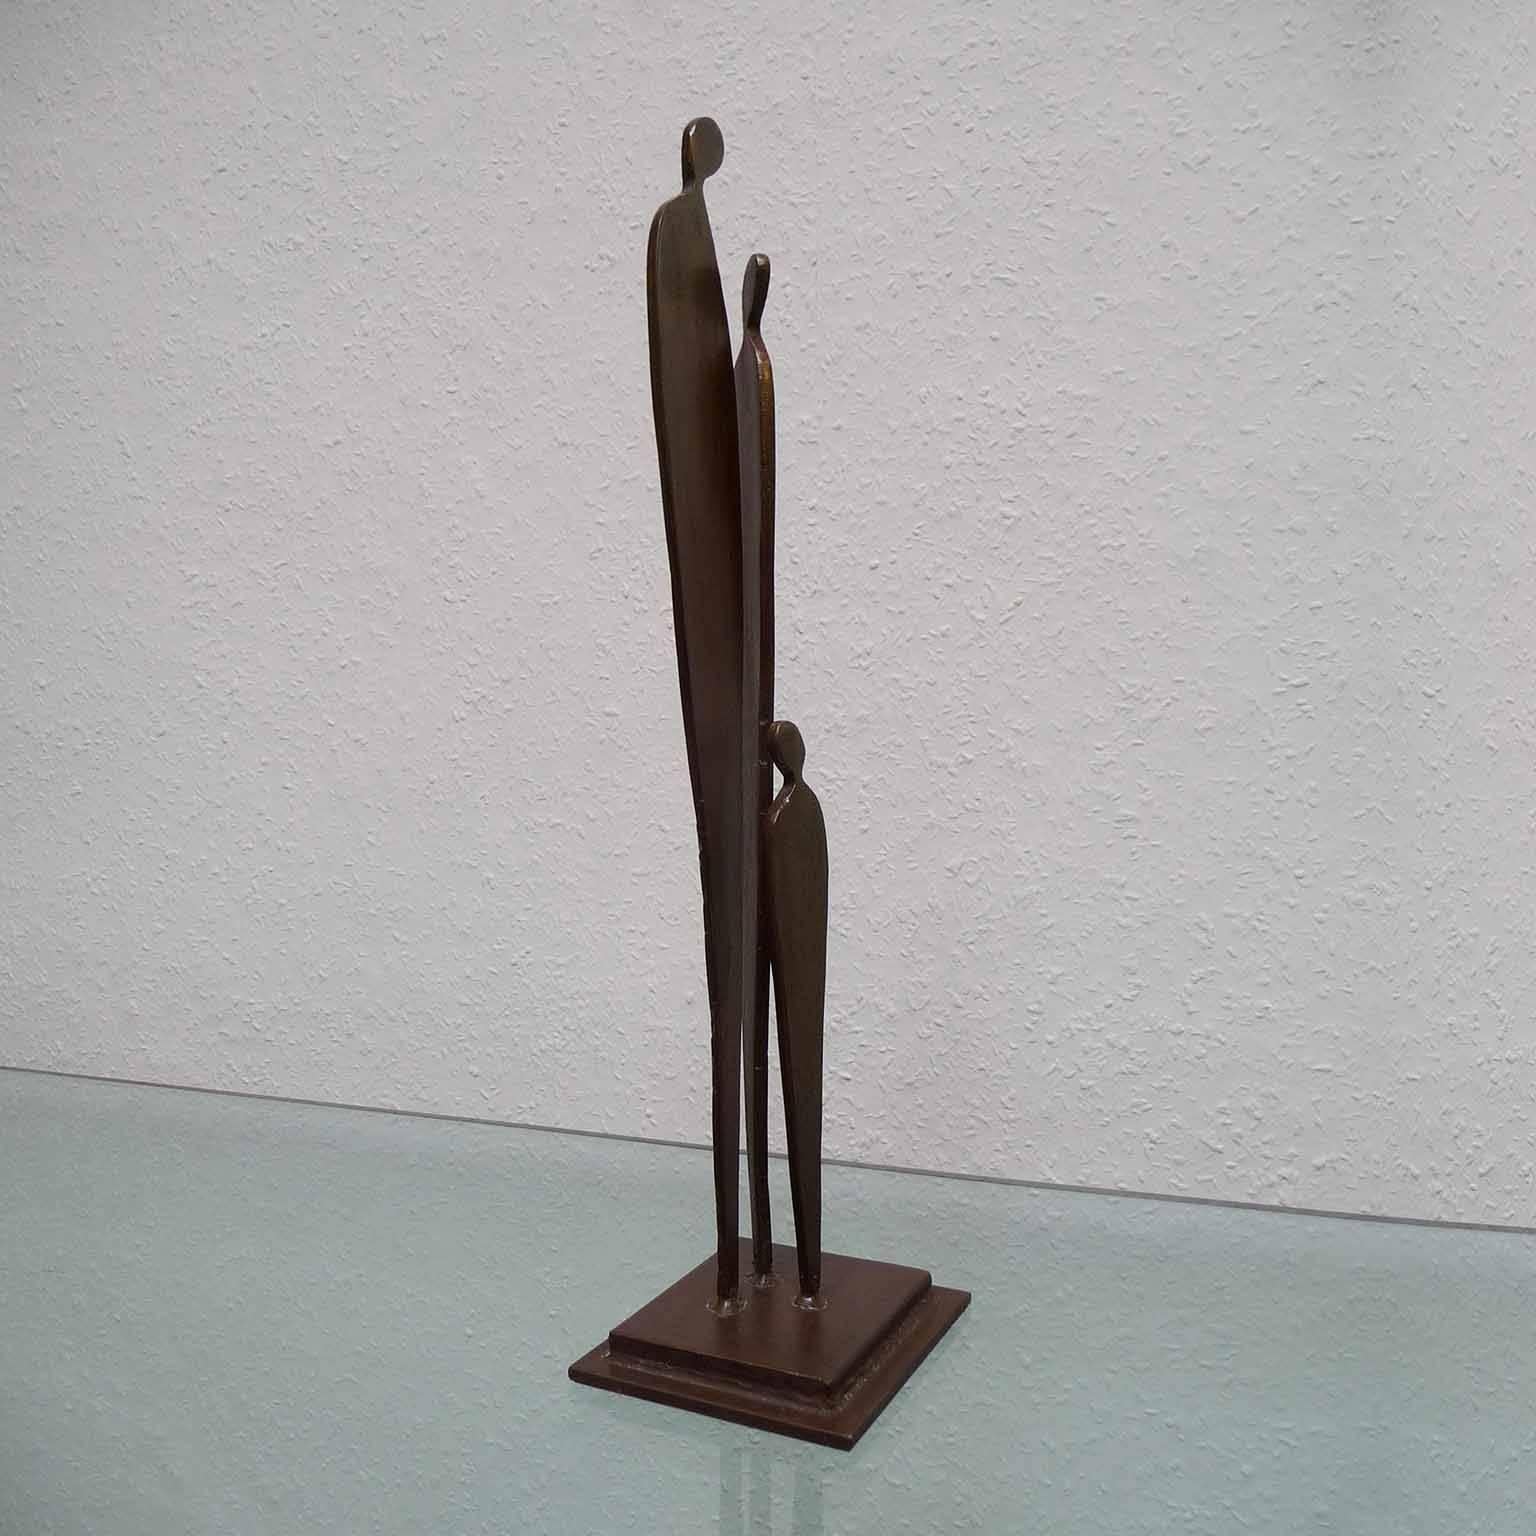 Pierre Donna Patinated Metal Contemporary Sculpture (Moderne)